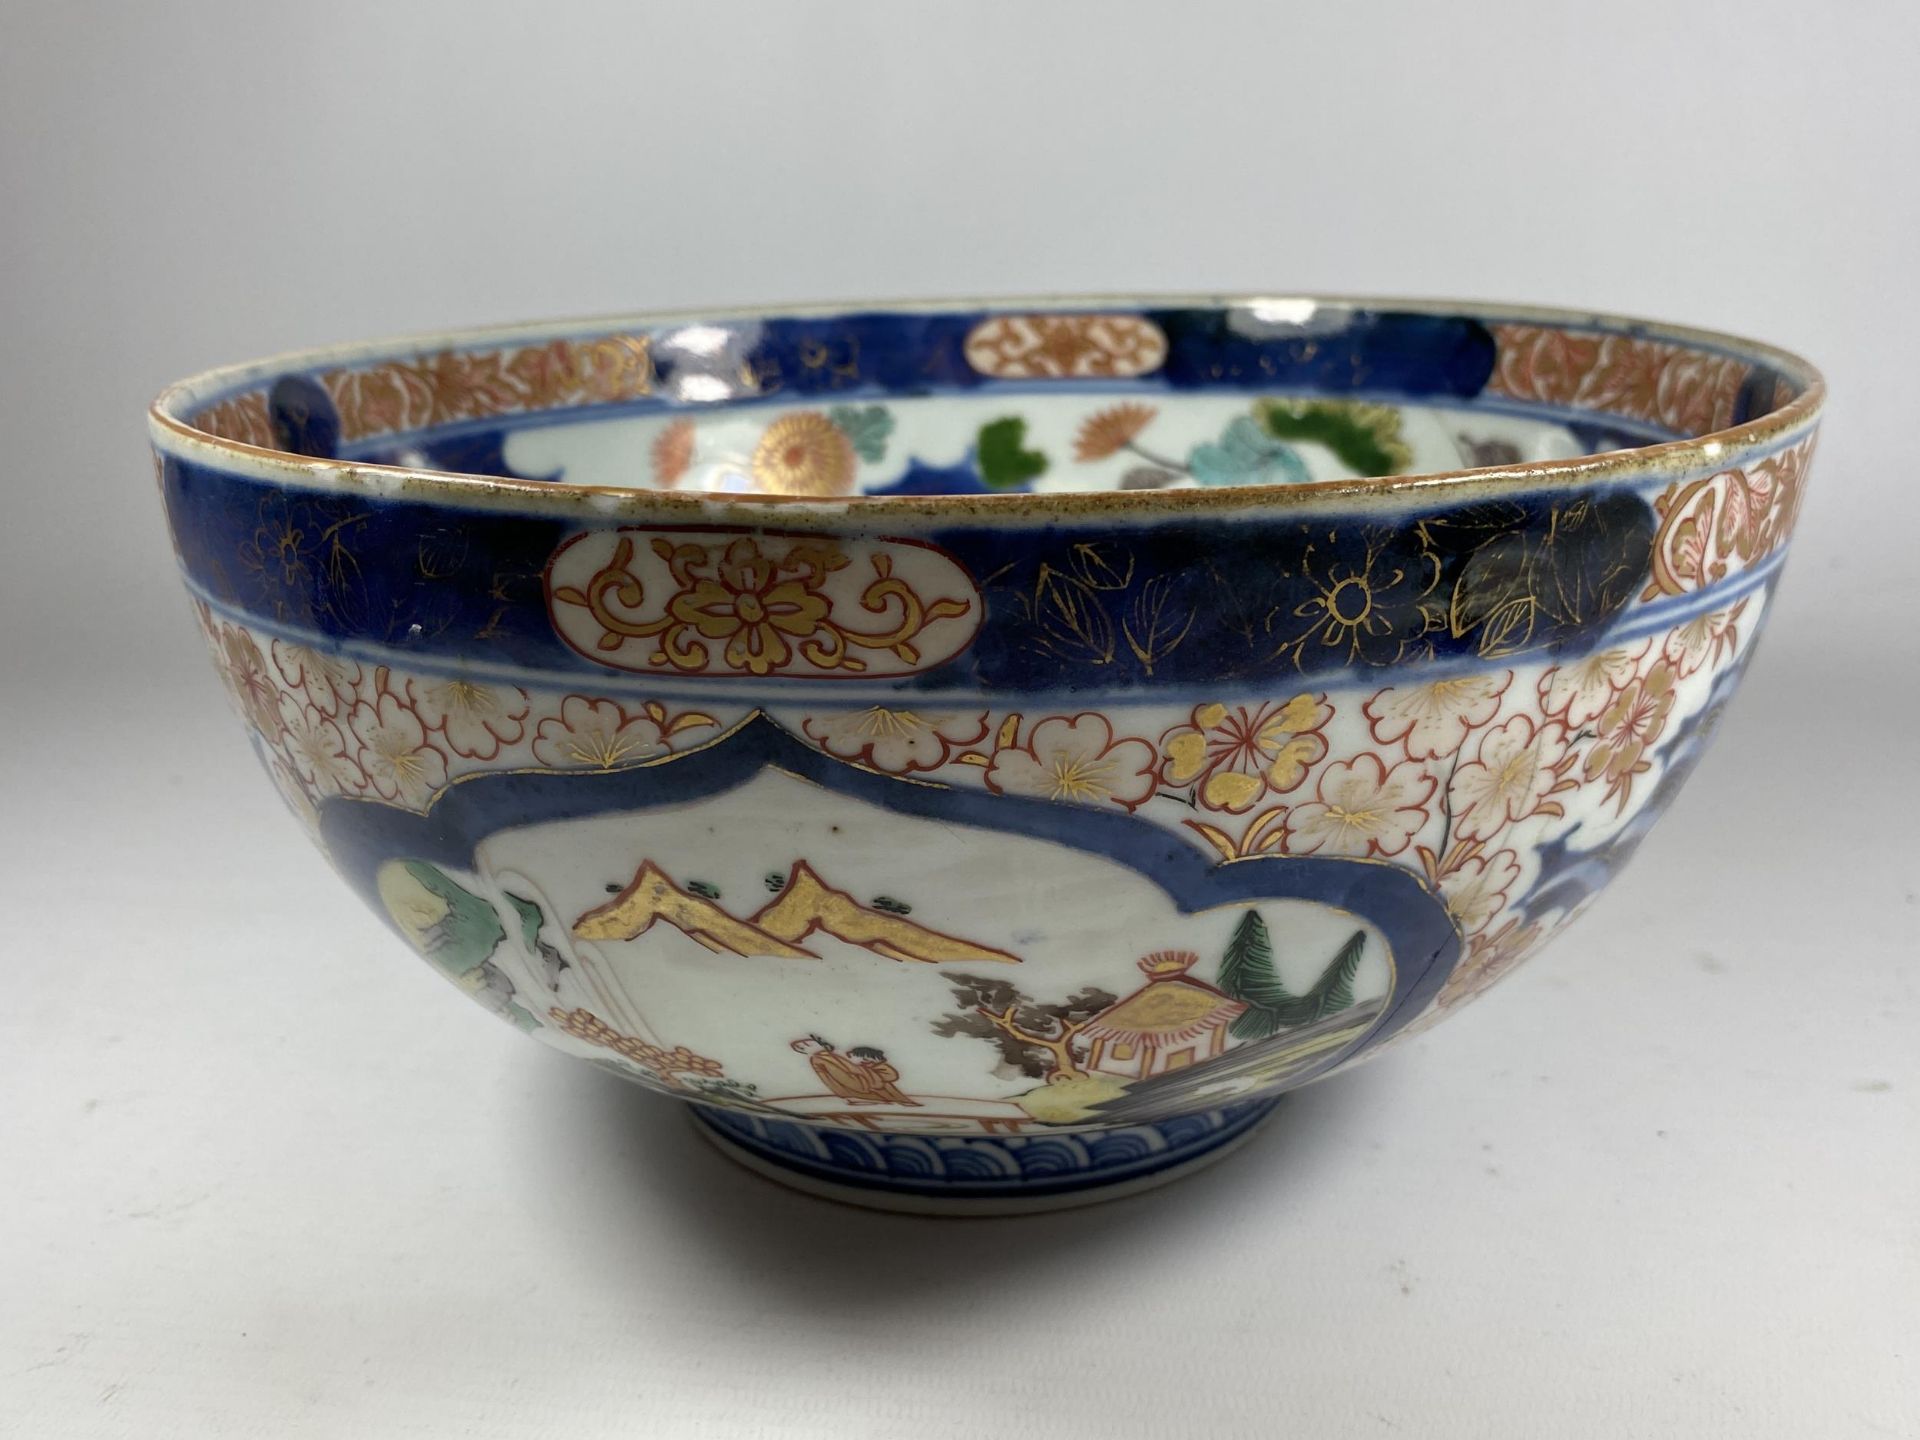 A LARGE JAPANESE MEIJI PERIOD (1868-1912) IMARI PORCELAIN FRUIT BOWL, FLORAL AND DOUBLE RING MARK TO - Image 3 of 9